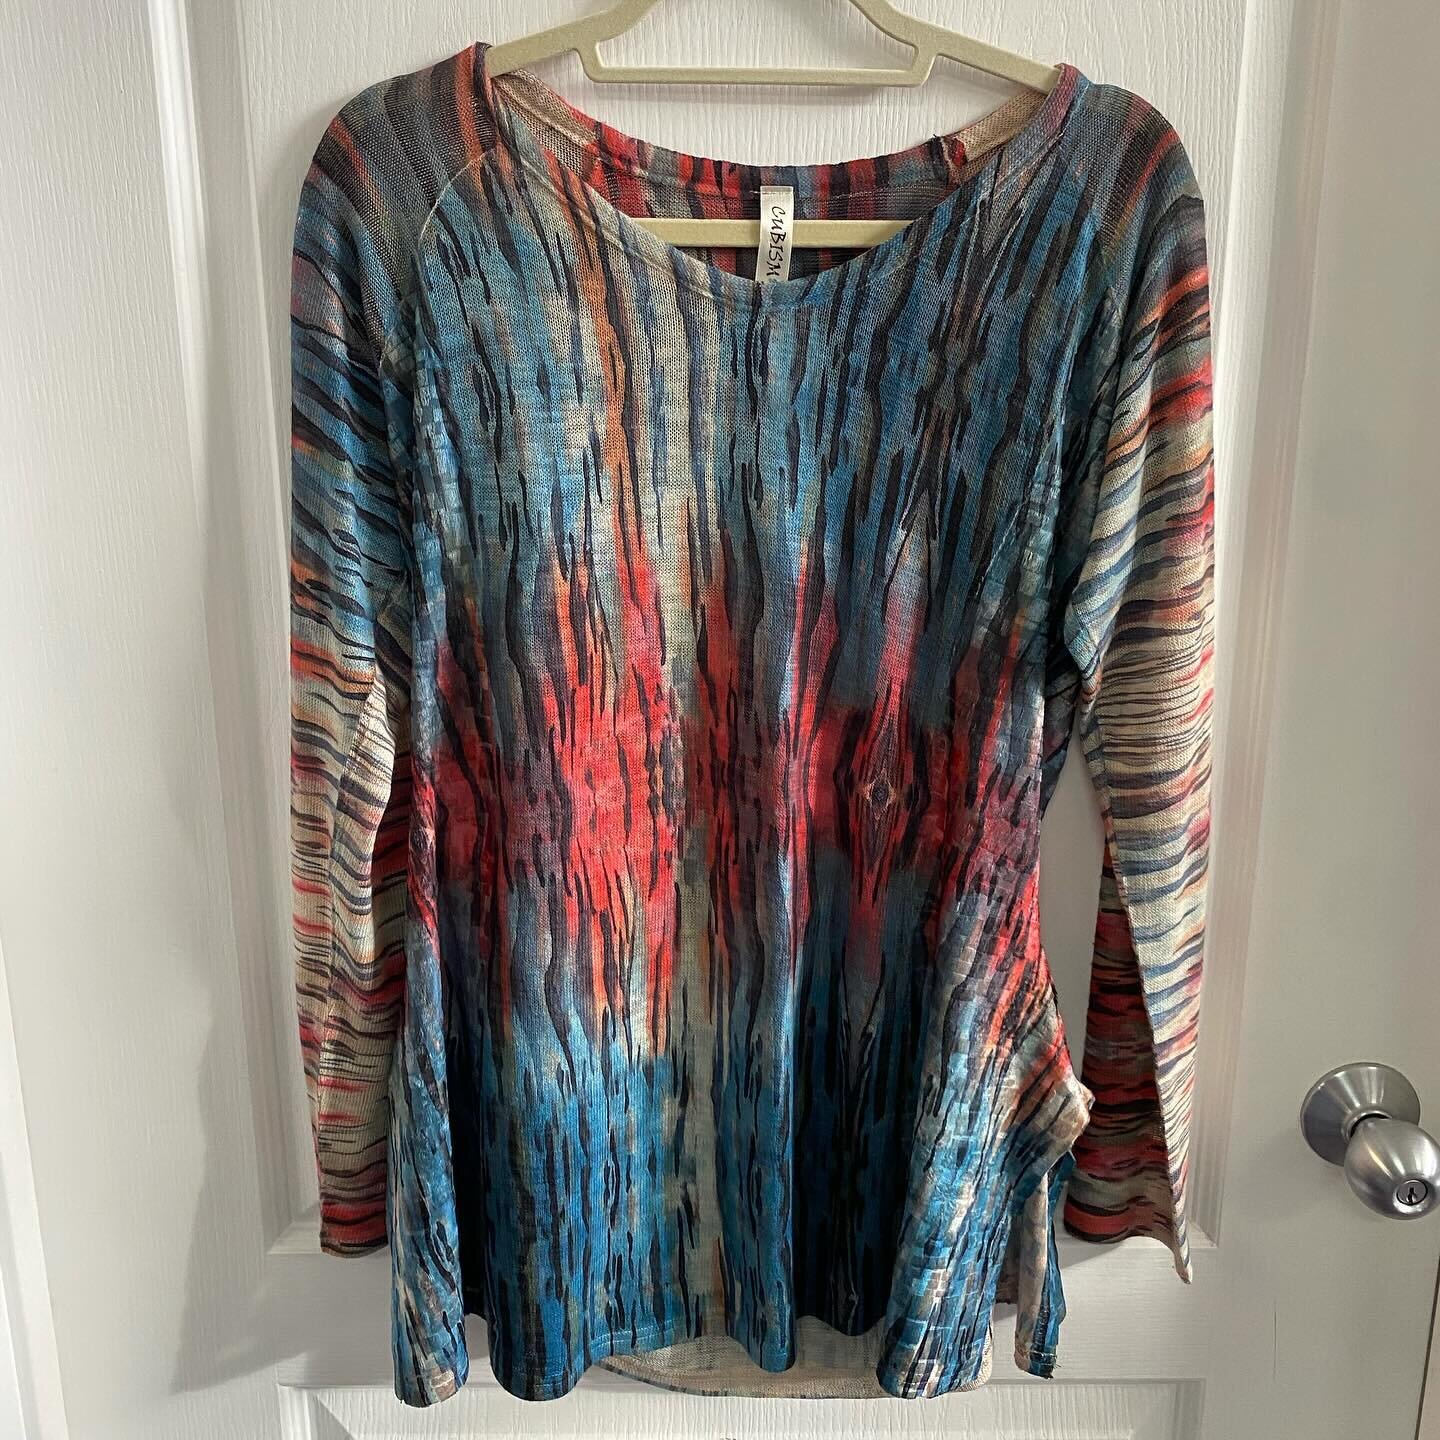 Some fun pieces for this gloomy day! 

Comment for more details. 

#consignment #boutique #northwestindiana #valparaisoindiana #resale #secondhand #girlsgirl